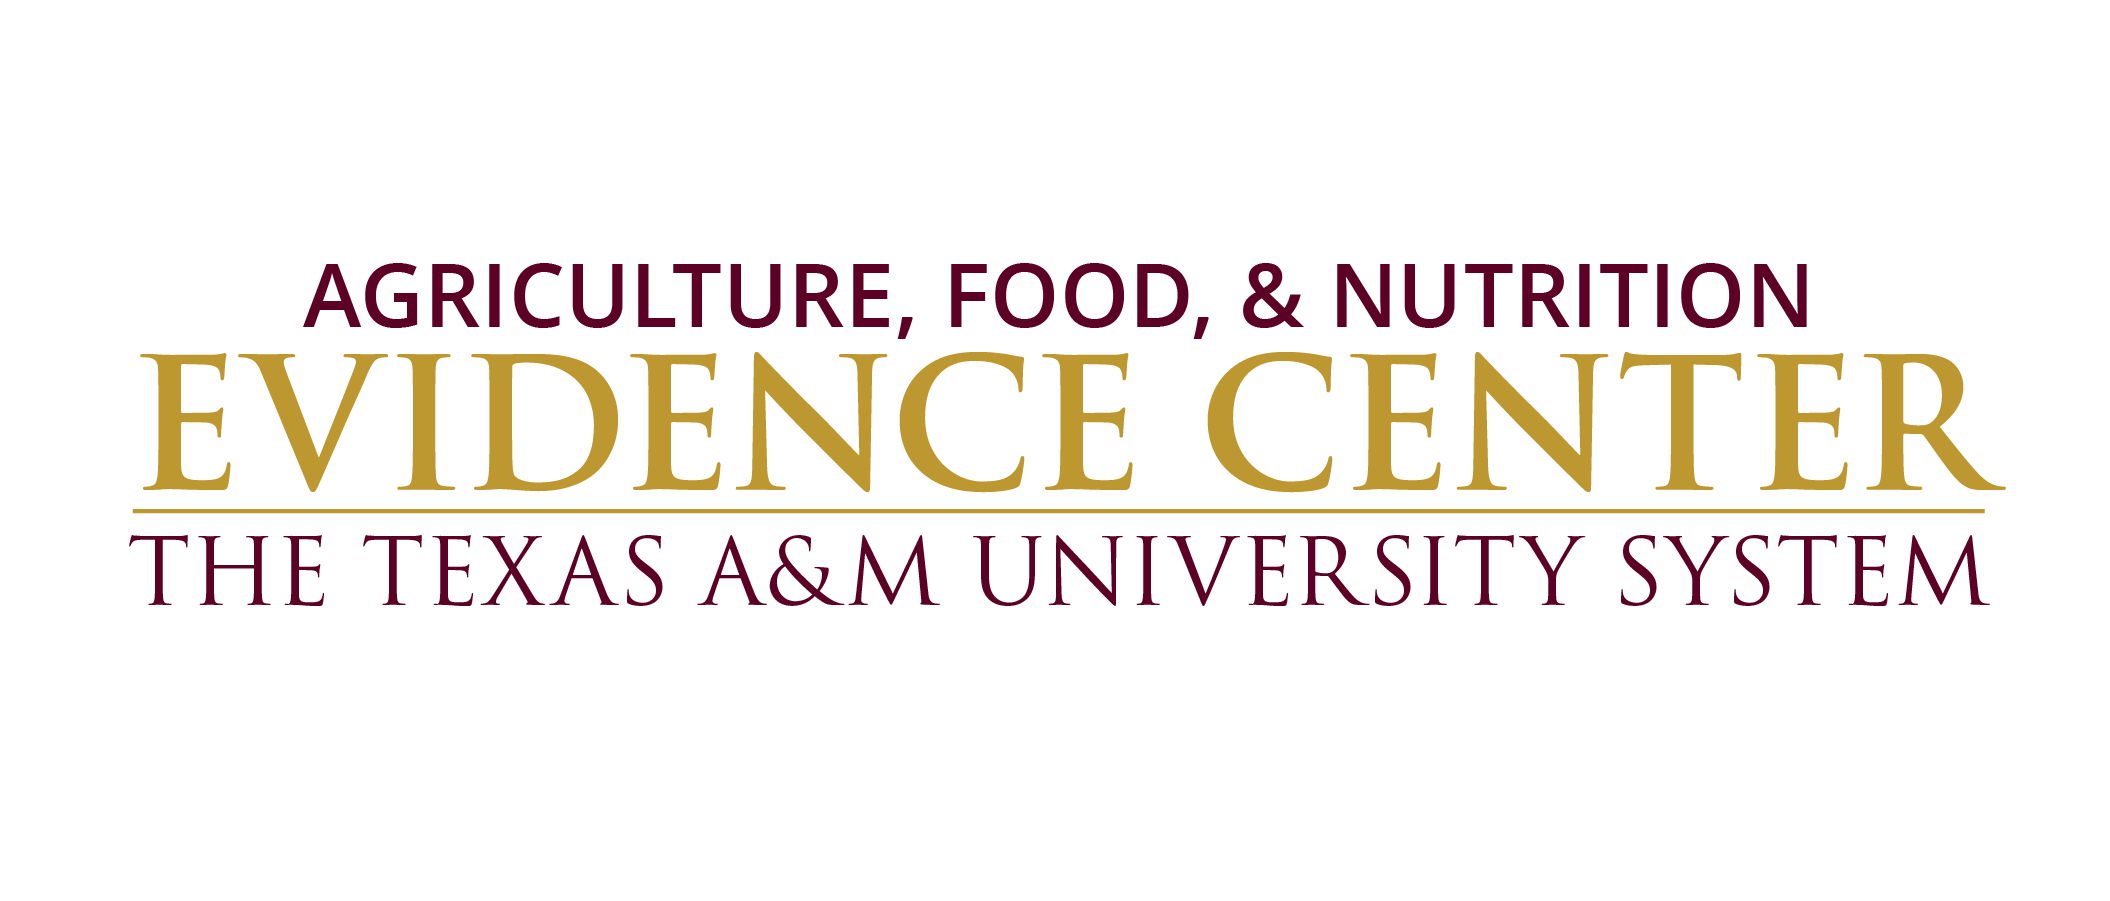 Texas A&M University, Fort Worth. Agriculture, Food, and Nutrition Evidence Center